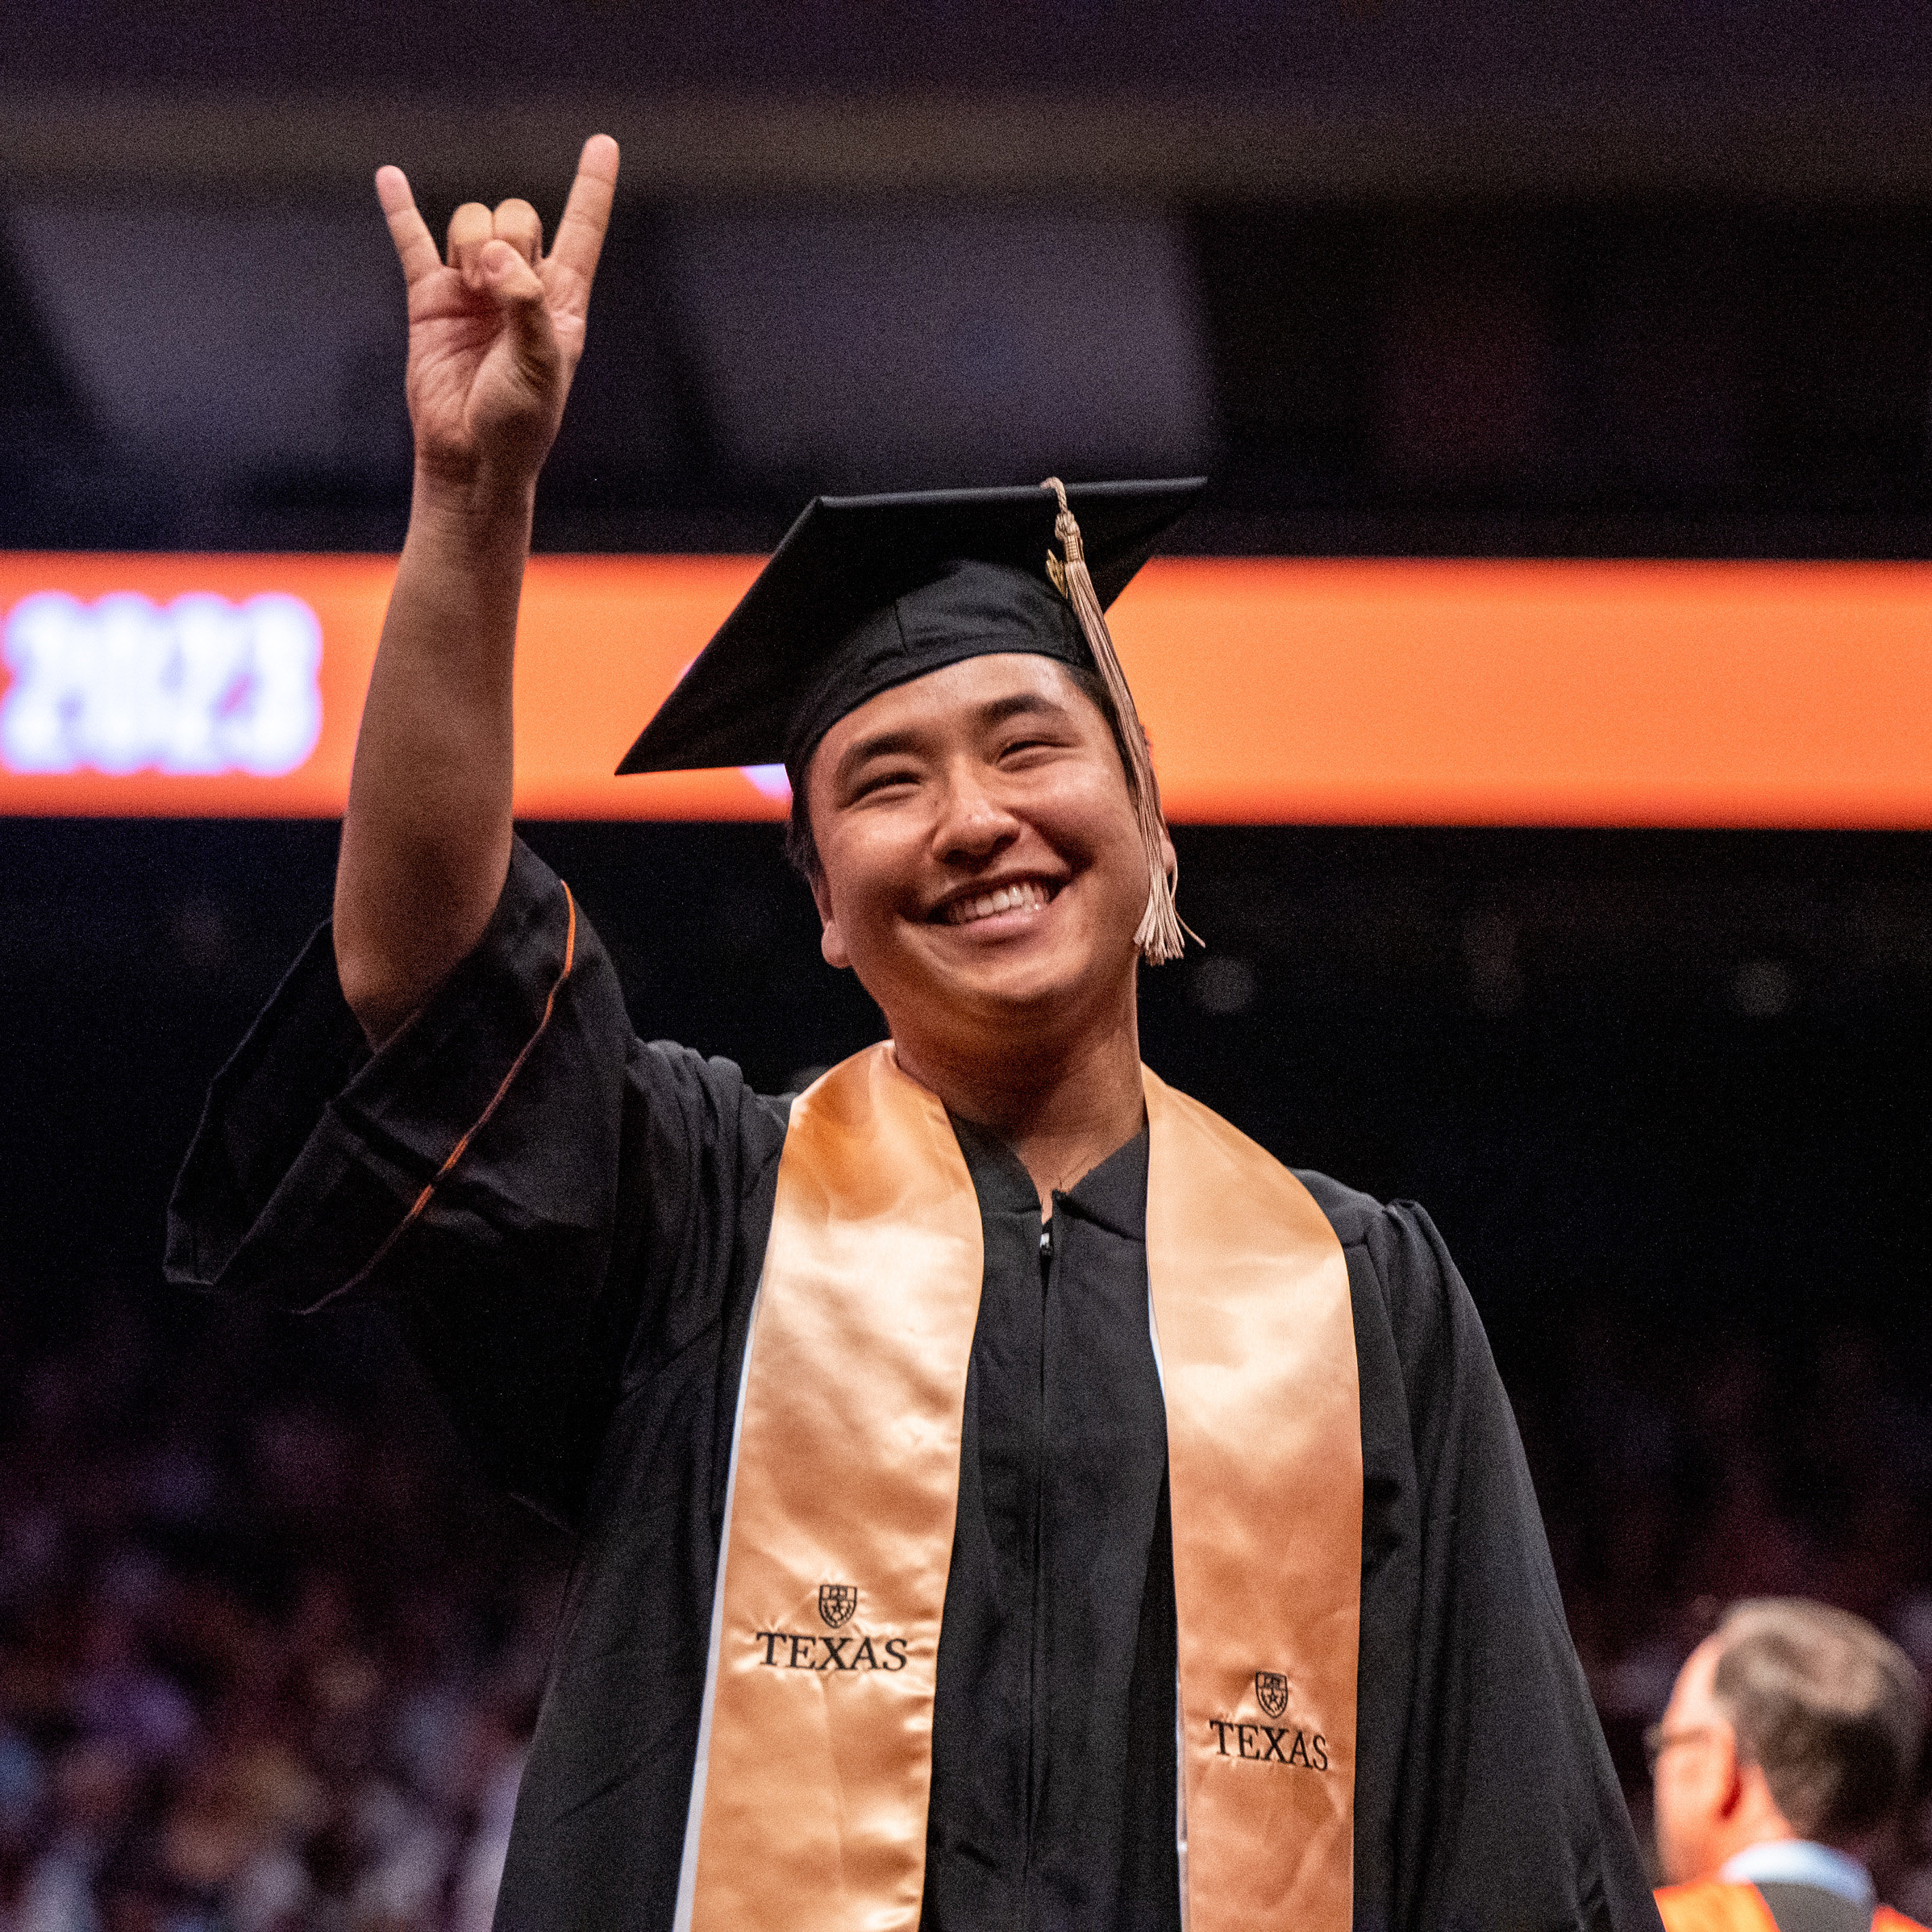 A student shows horns up as he walks across the graduation stage.